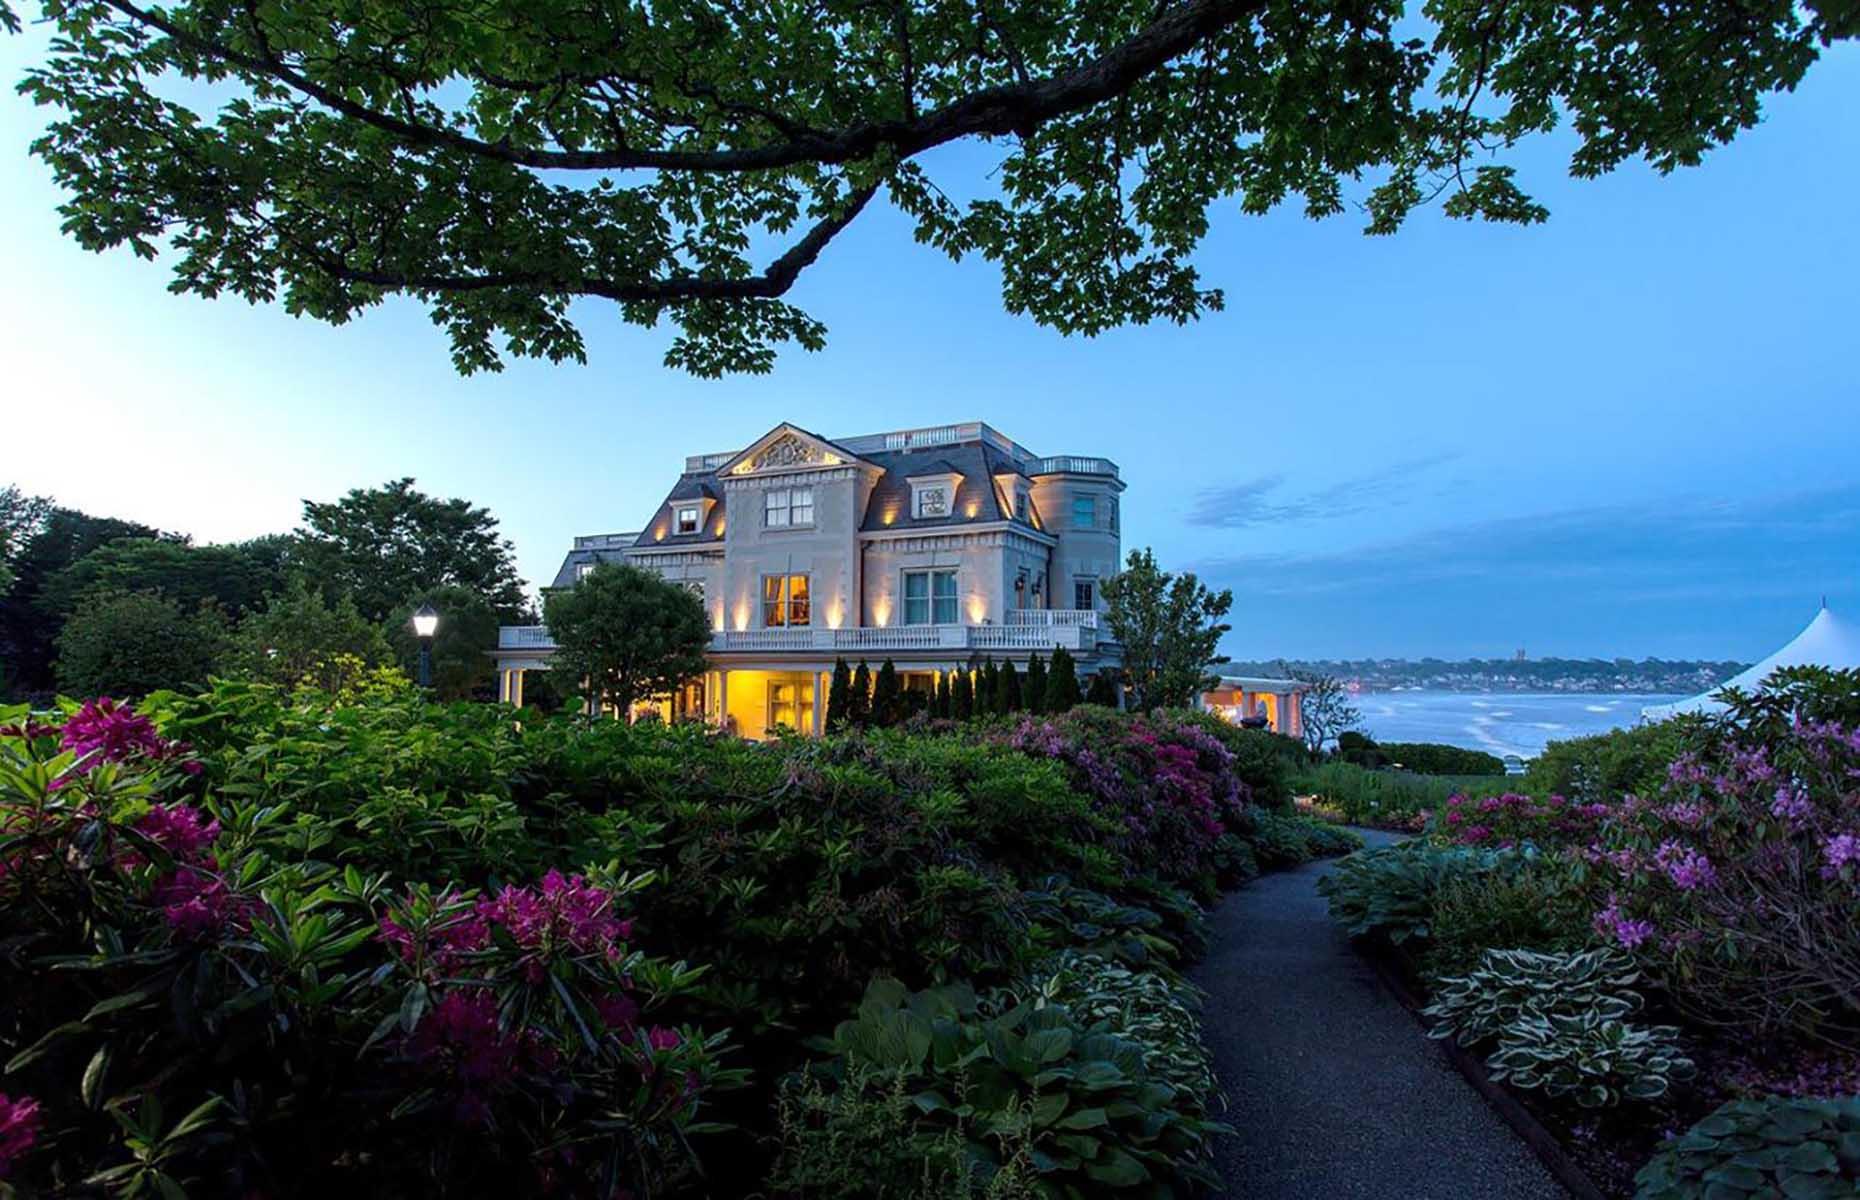 <p>Few New England hotels can rival this one when it comes to location: The Chanler looks over the Atlantic from a bluff on Newport's famous Cliff Walk, a route studded with sumptuous Gilded Age mansions. The hotel is small but perfectly formed, with 20 neat rooms tucked away inside a 19th-century mansion – each room is designed to evoke a particular era, from dark wood and a curtained bed in the English Tudor suite to intricate molding and gilded details in the Renaissance chamber.</p>  <p><strong><a href="https://www.loveexploring.com/galleries/90765/the-most-glamorous-hotel-in-every-state">Discover your state's most glamorous hotel</a></strong></p>